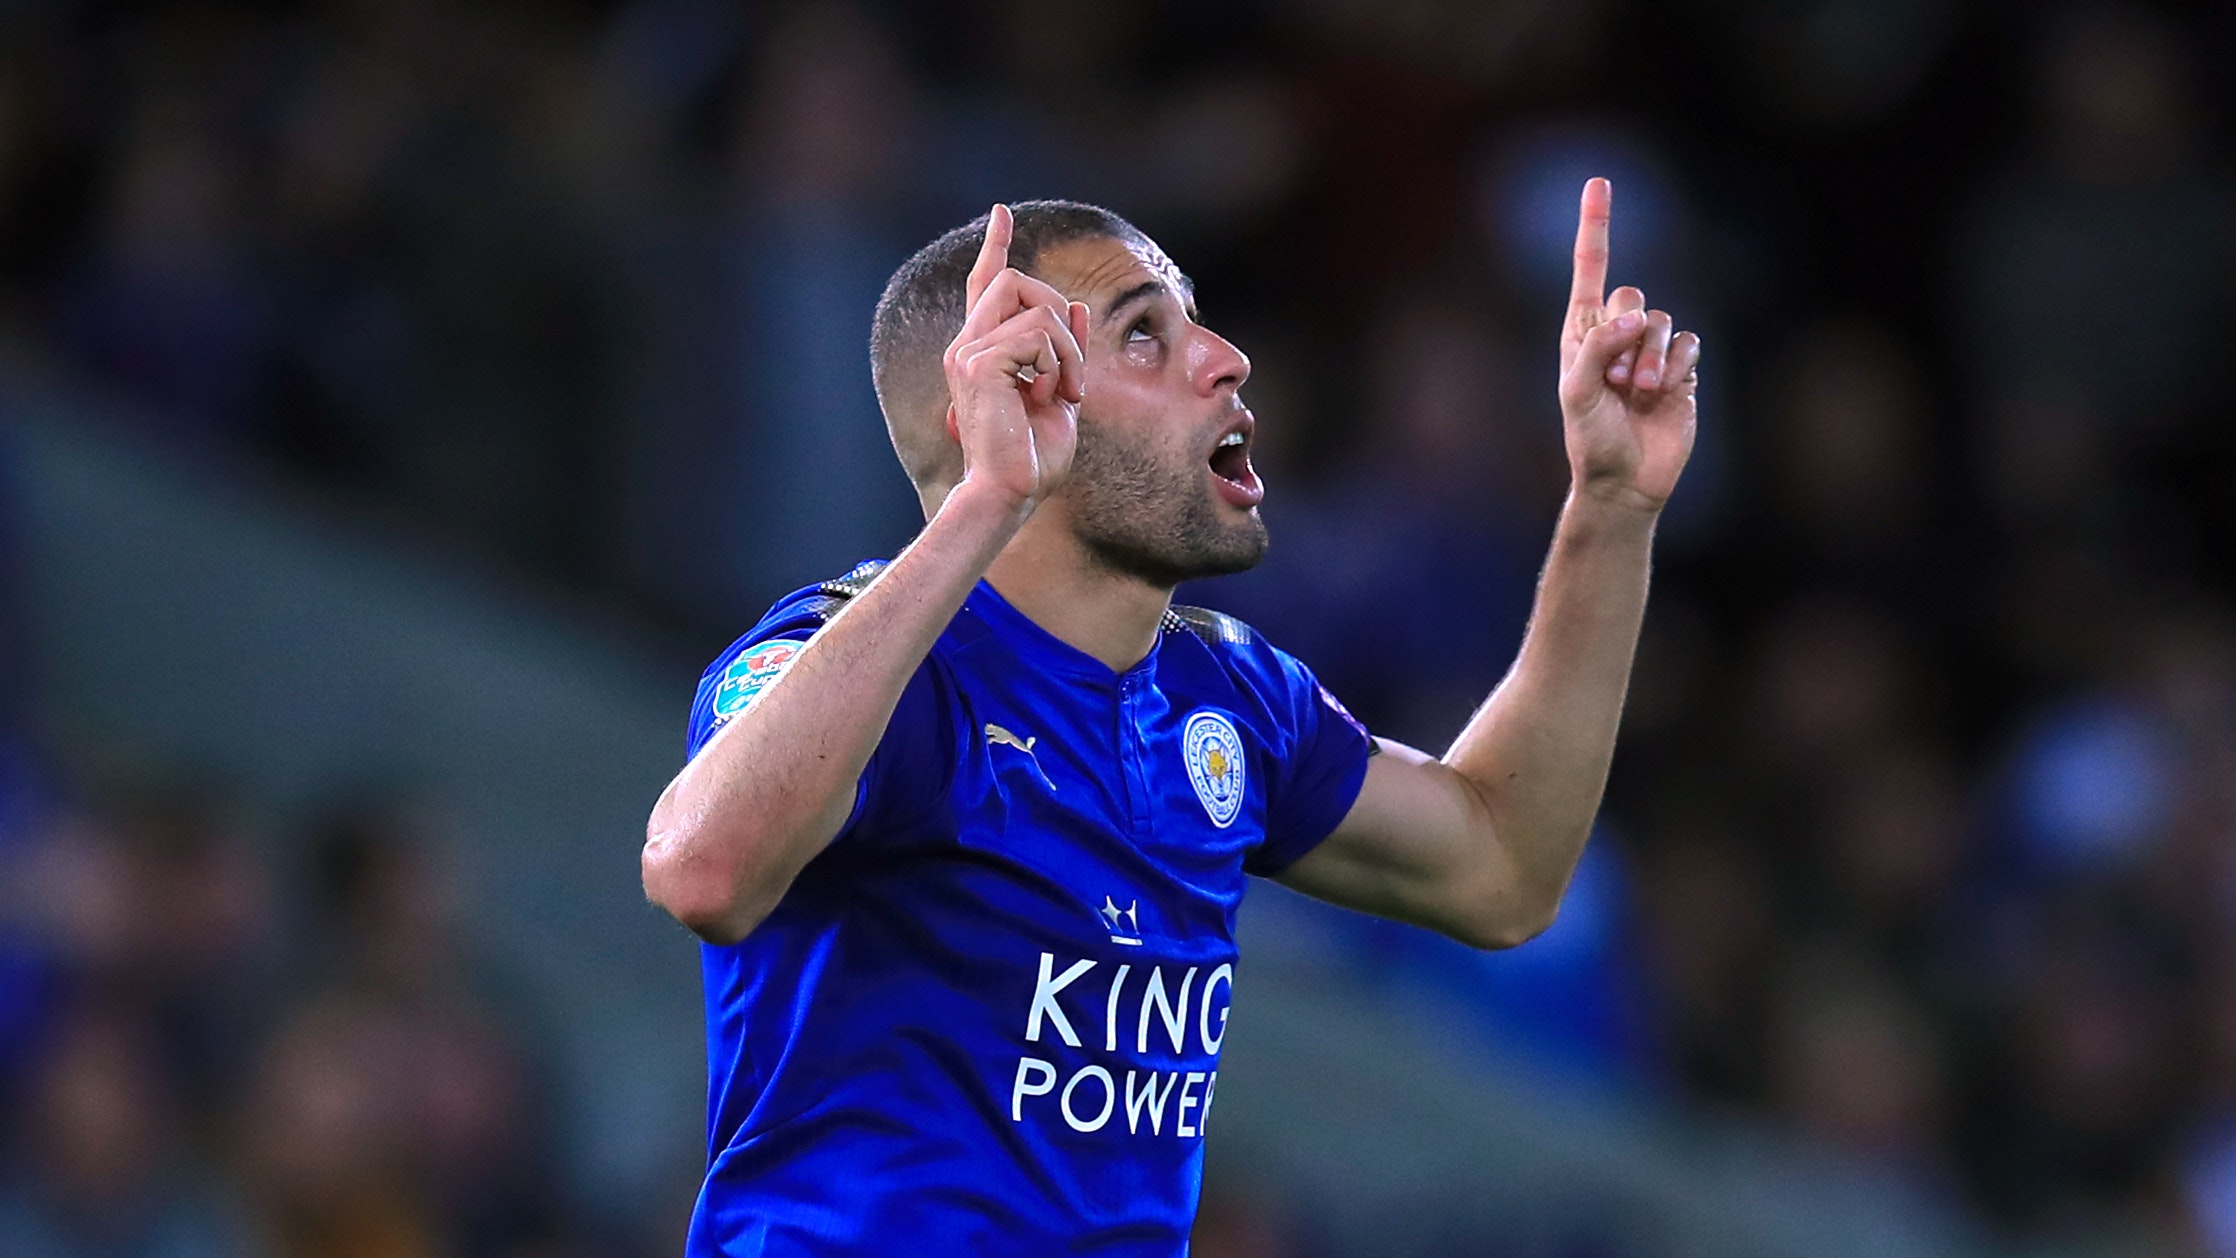 Leicester City man’s team’s Group-stage heroics mean nothing now